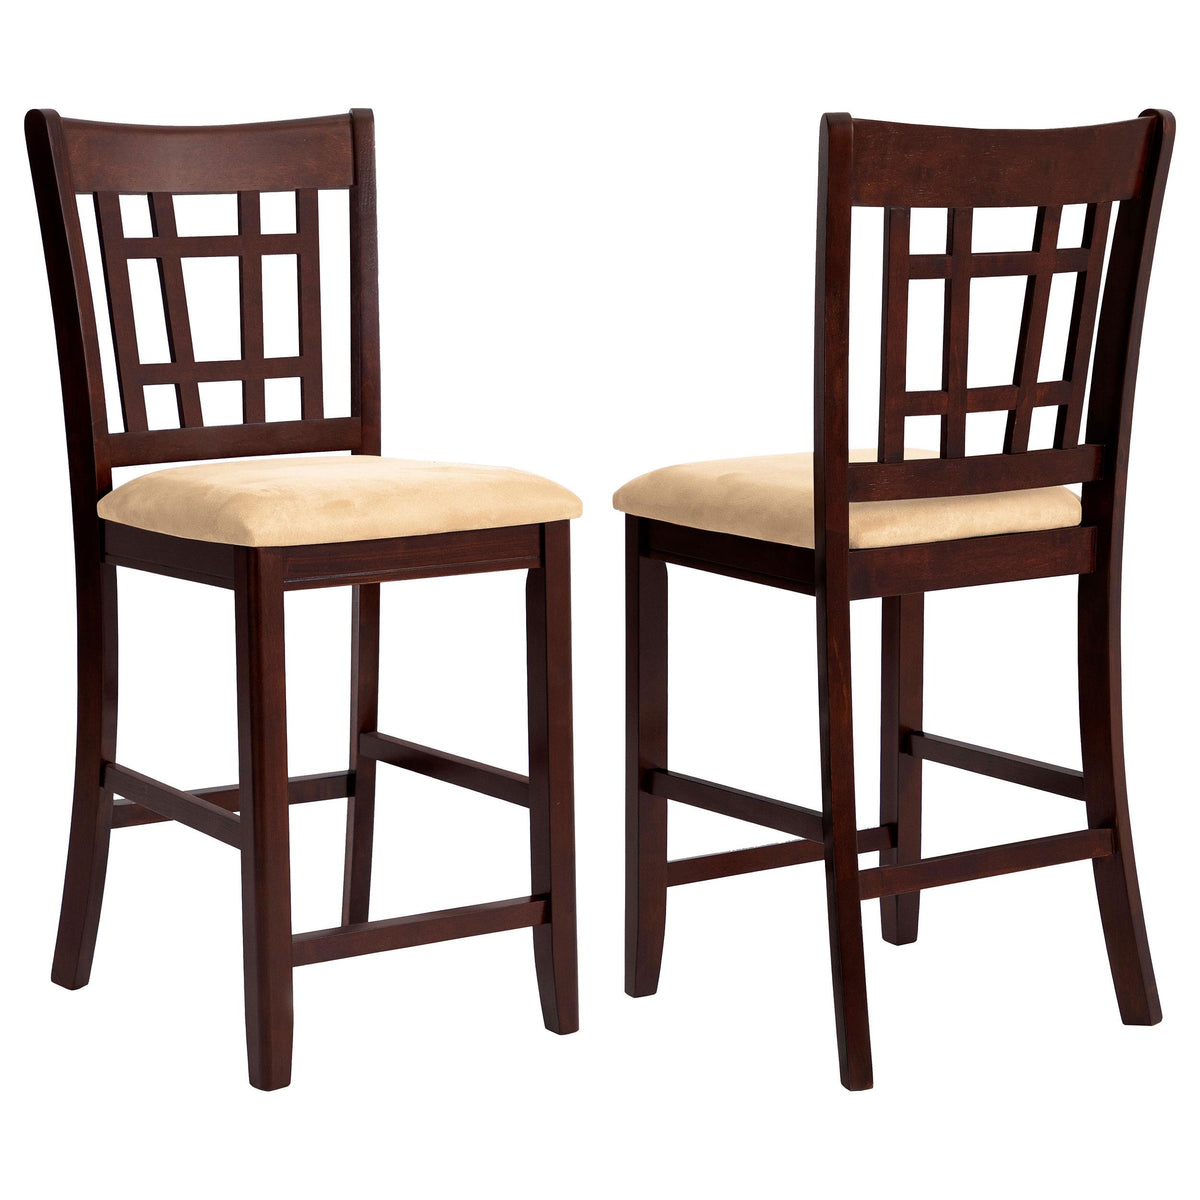 Lavon 24" Counter Stools Tan and Brown (Set of 2) Lavon 24" Counter Stools Tan and Brown (Set of 2) Half Price Furniture